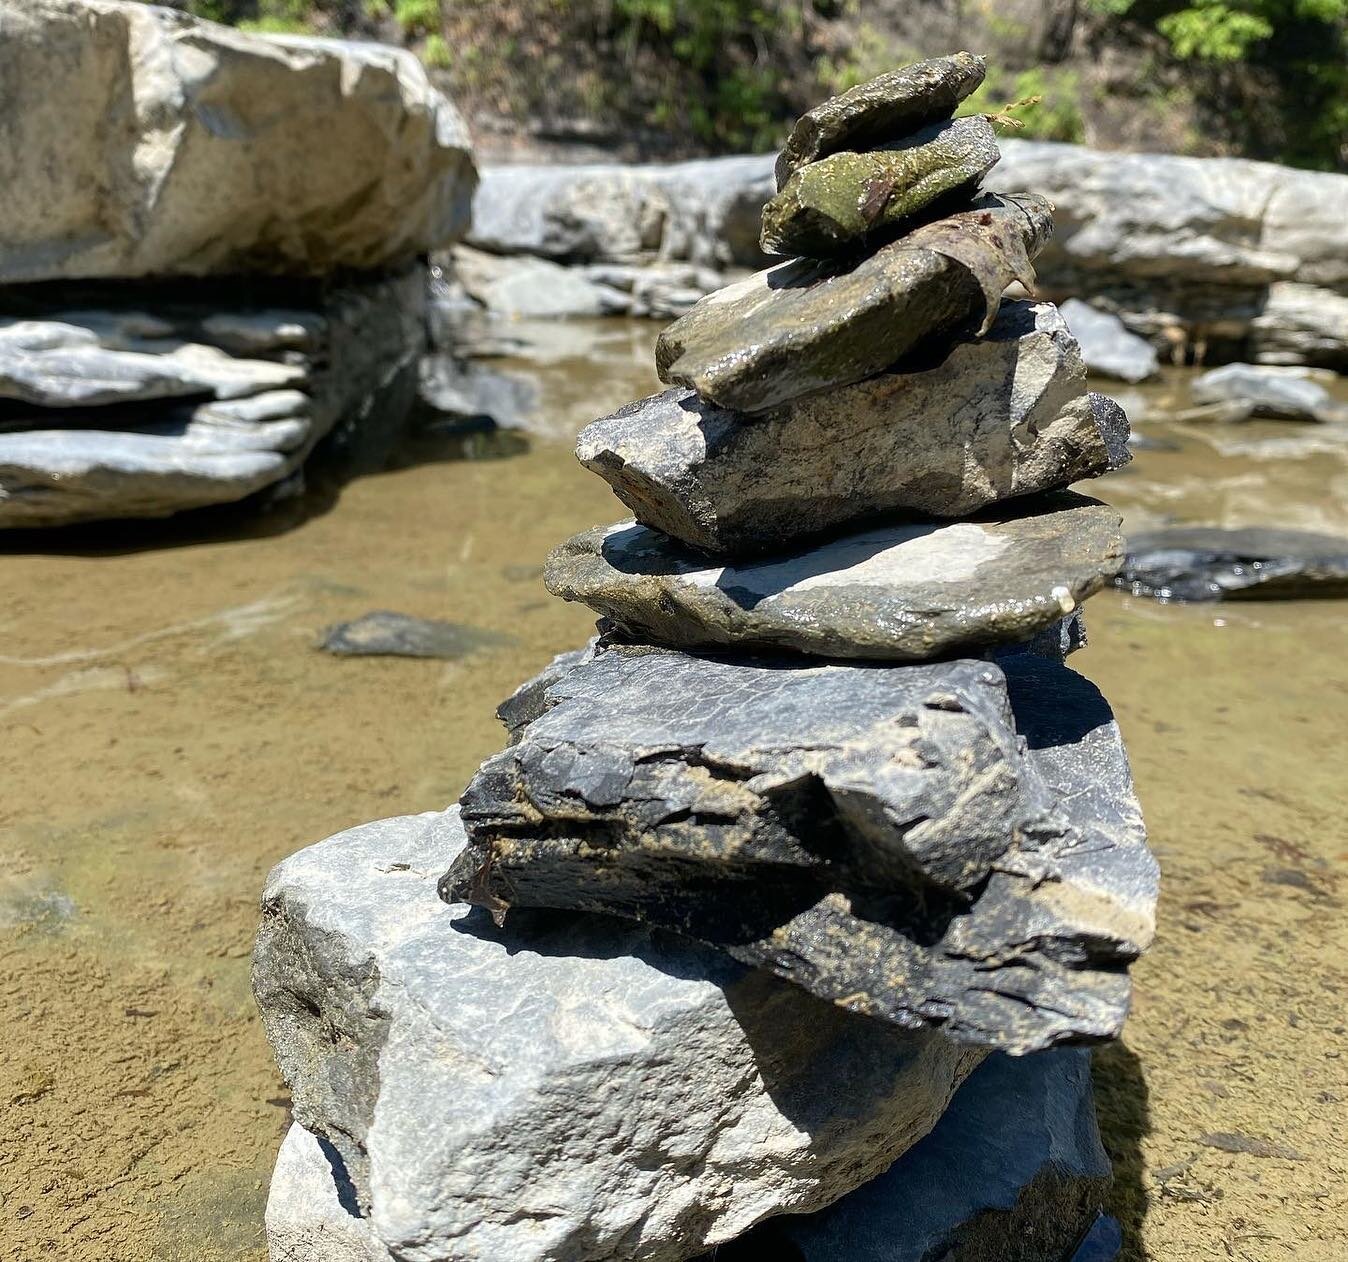 Rocks 
 
Have you ever seen these? 
My loved one used to build rock piles on the beach, and when we went hiking. In graduate school, we learned about Cairns as archetypes: rock piles that symbolize Hermes, the ancient Greek messenger god. The very fi